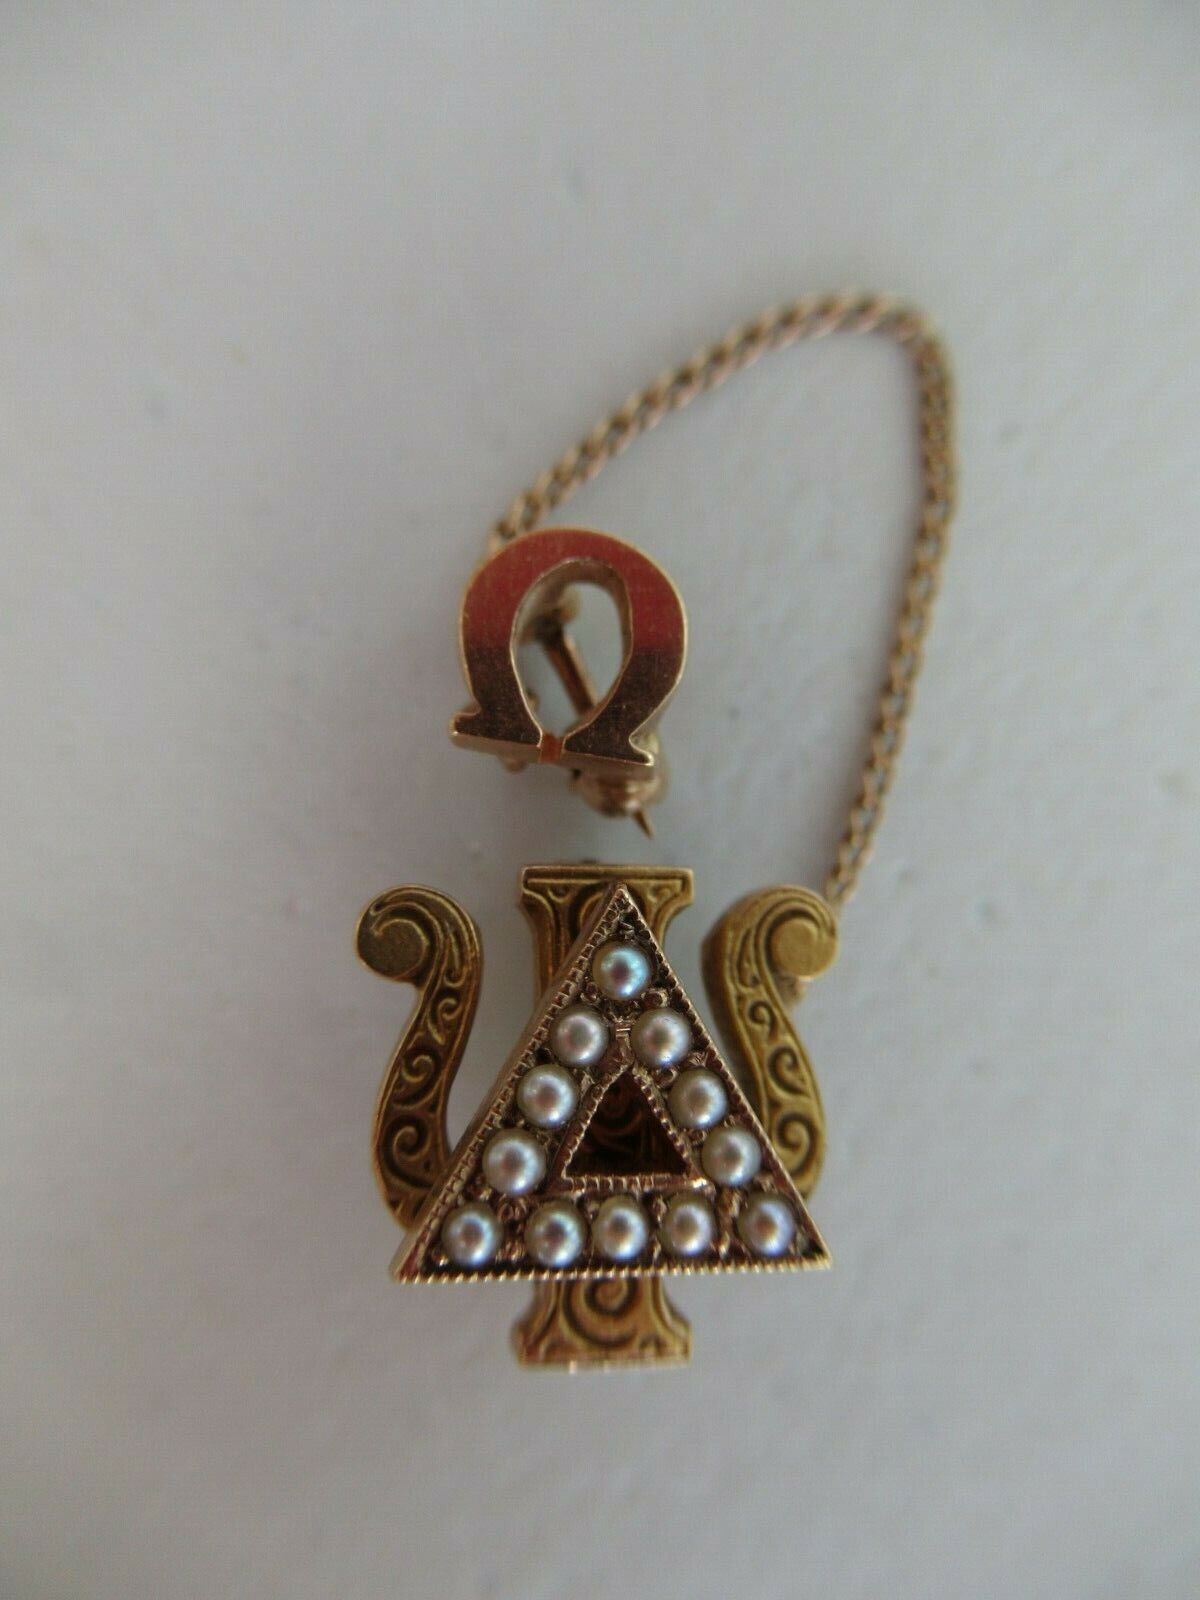 USA FRATERNITY PIN DELTA PSI. MADE IN GOLD. 856